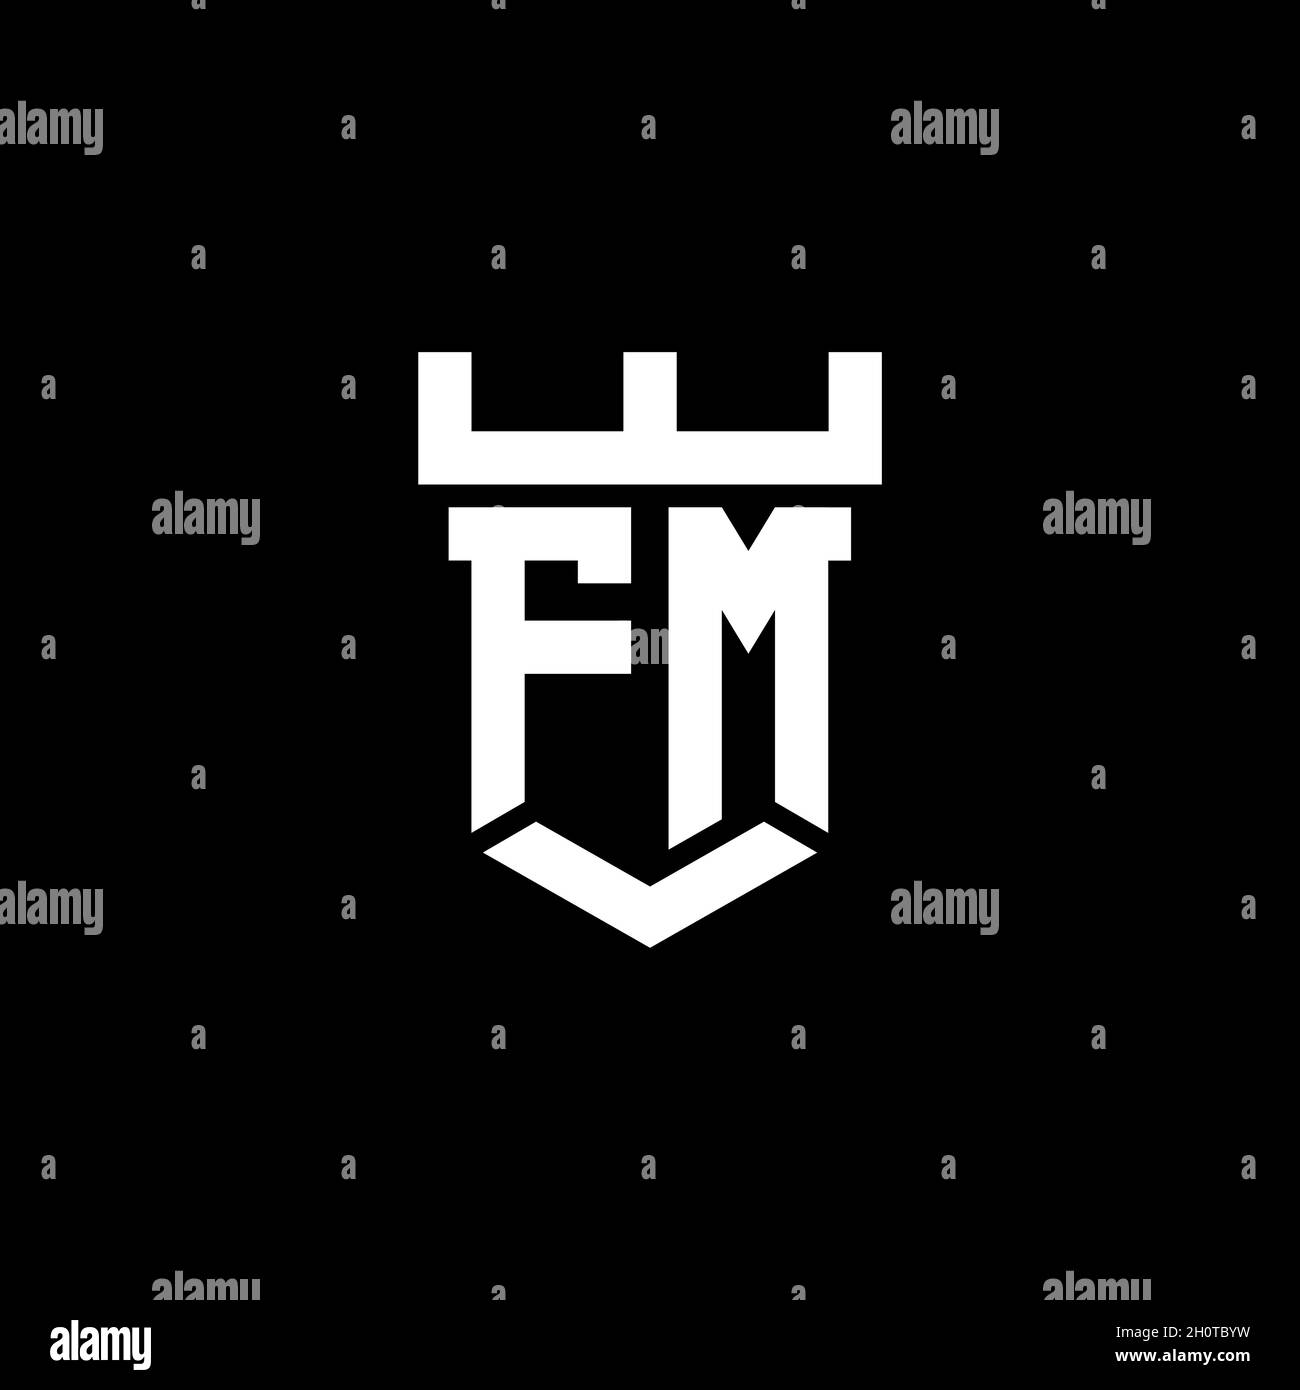 FM logo initial monogram with castle shape style design template isolated in black background Stock Vector